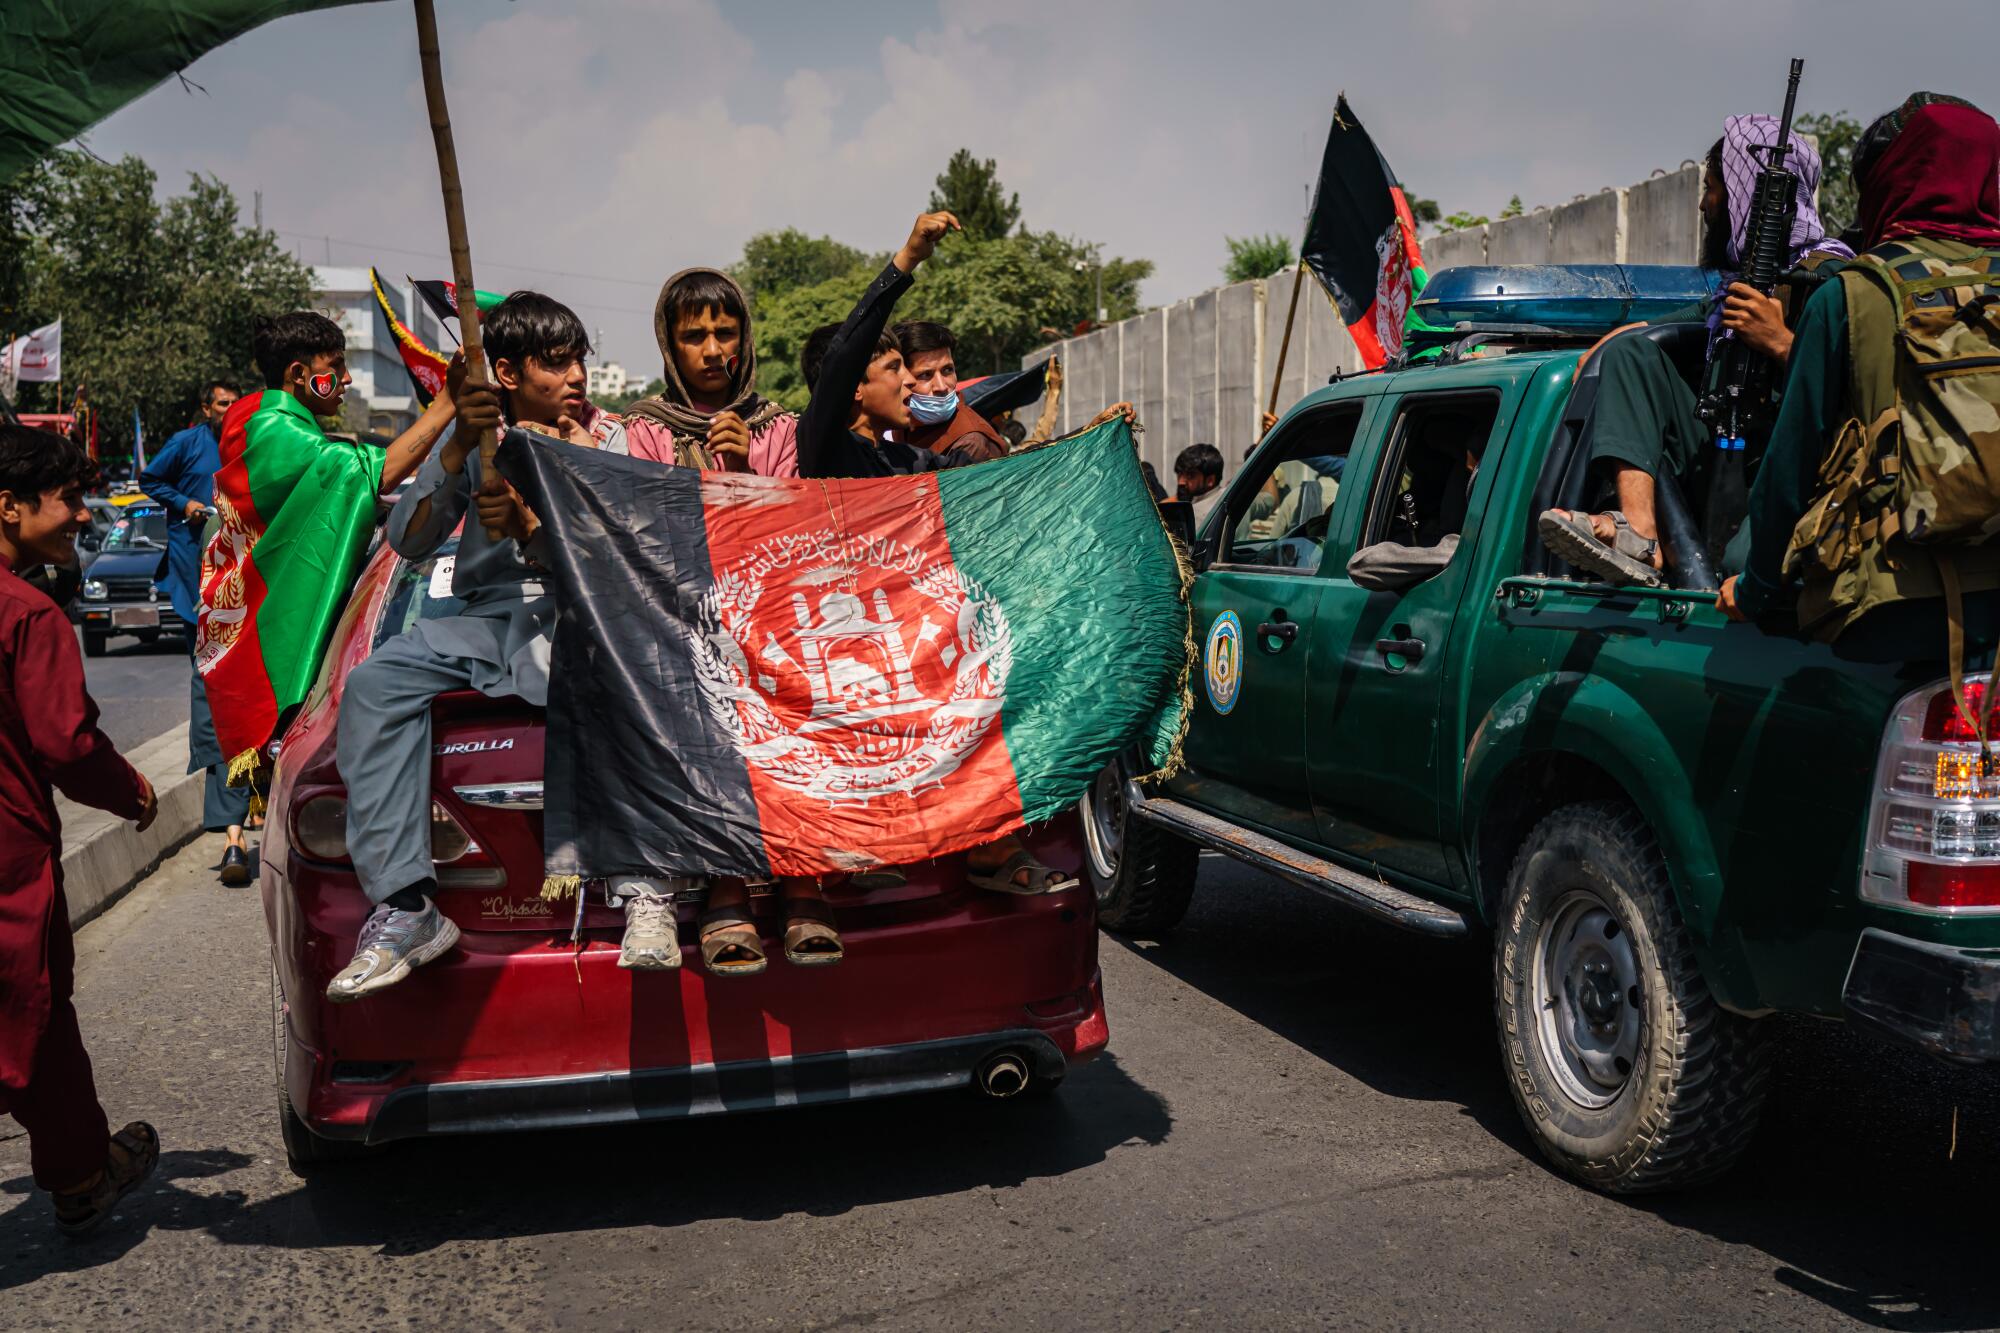 Afghans march down the street carrying banners and the flag of Afghanistan